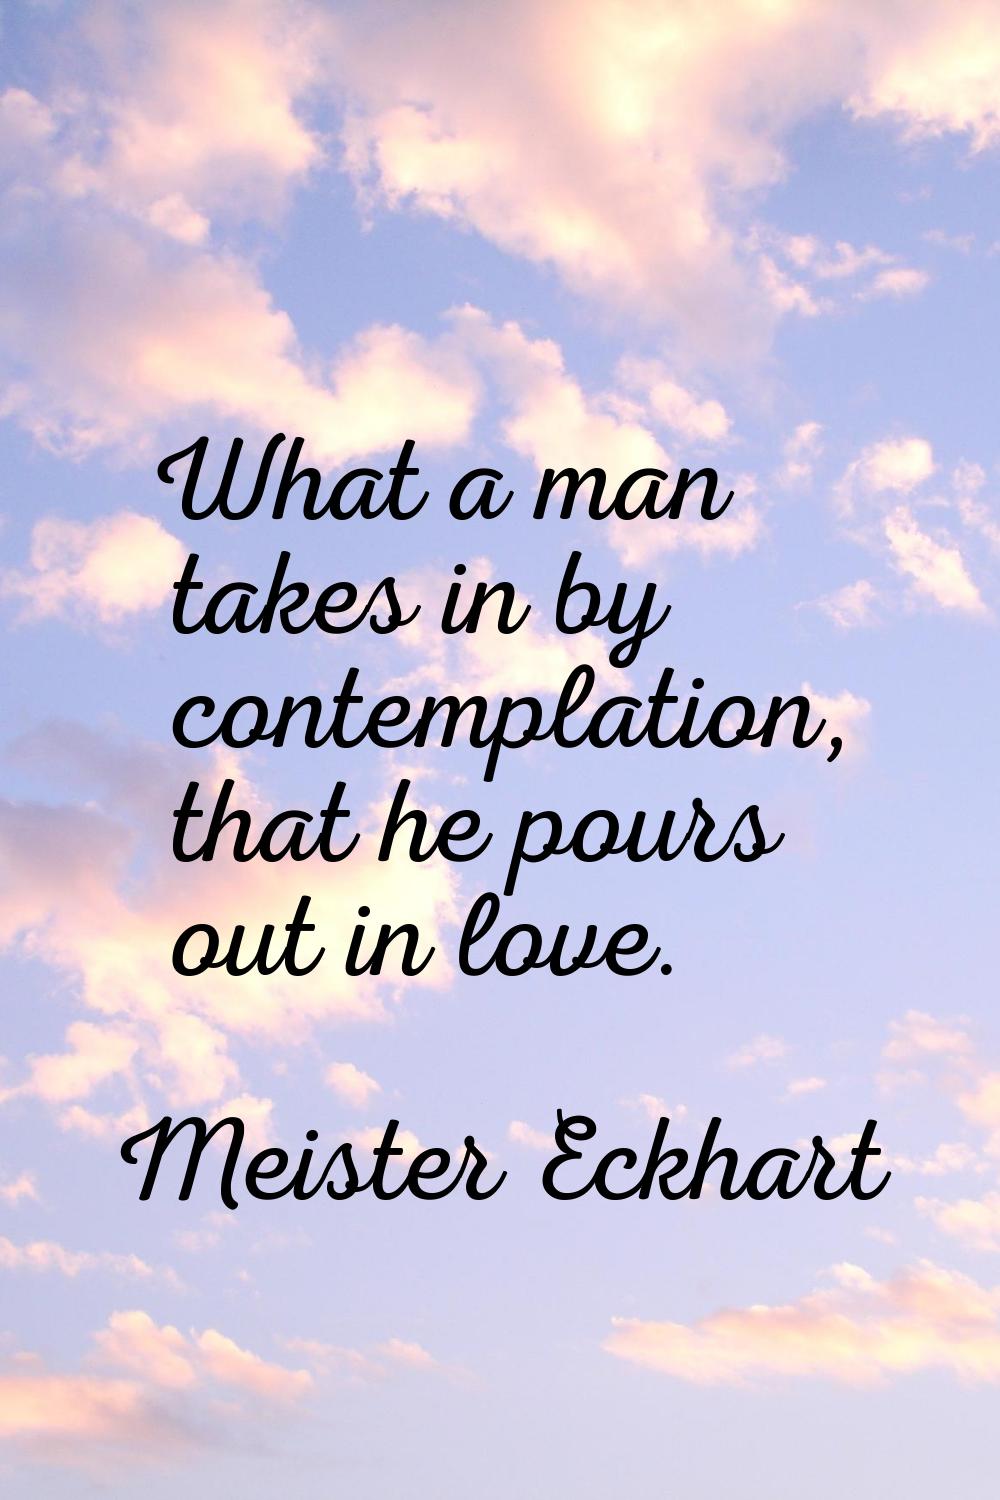 What a man takes in by contemplation, that he pours out in love.